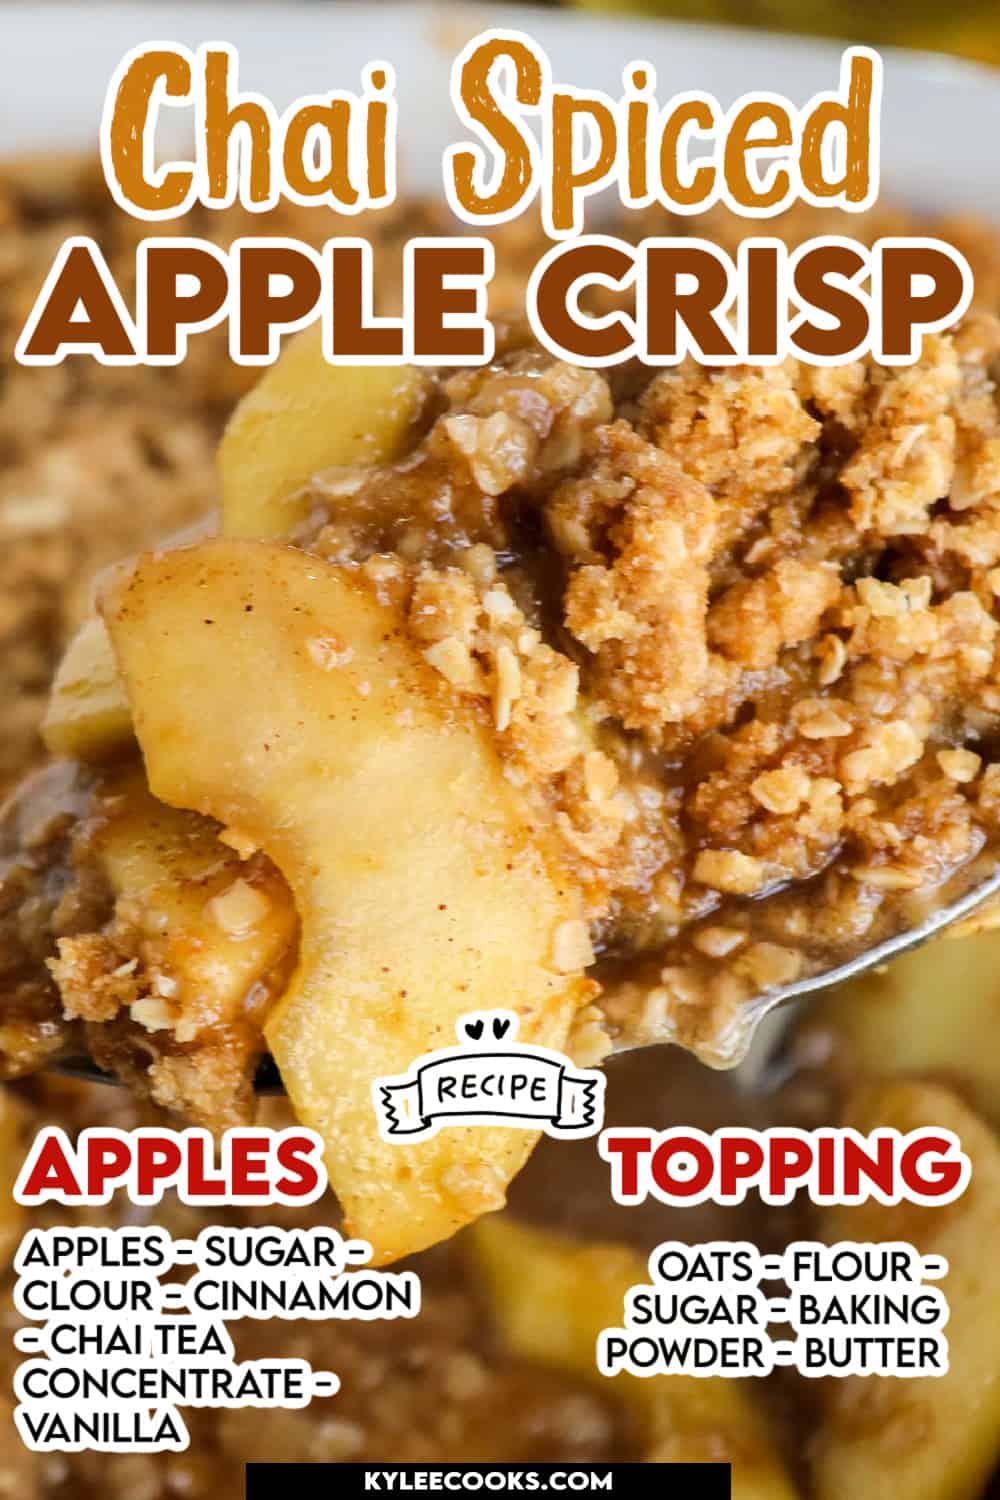 Apple Crisp with recipe name and ingredients overlaid in text.